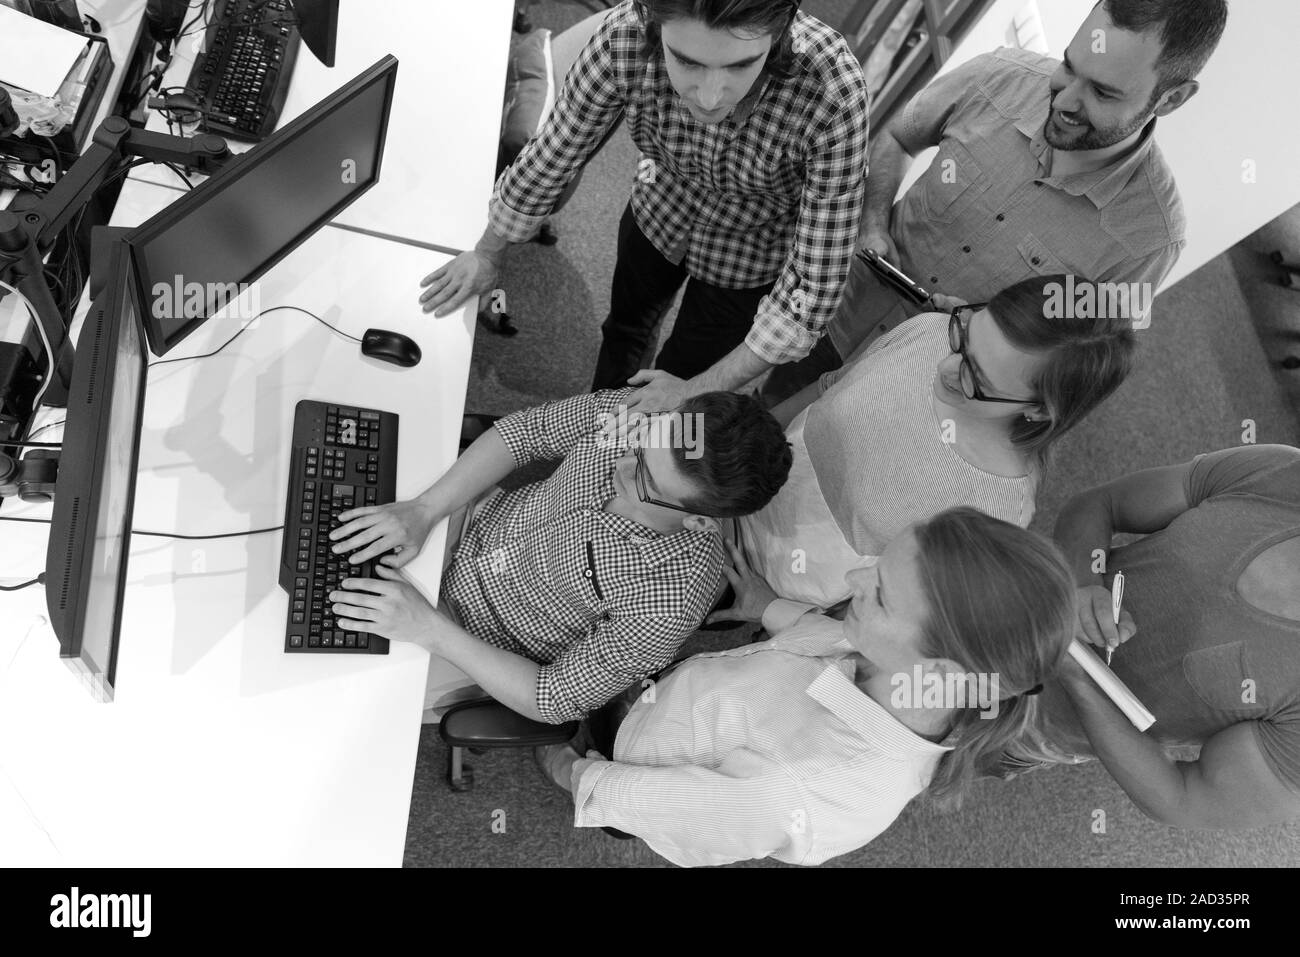 startup Business people group working as team to find solution Stock Photo